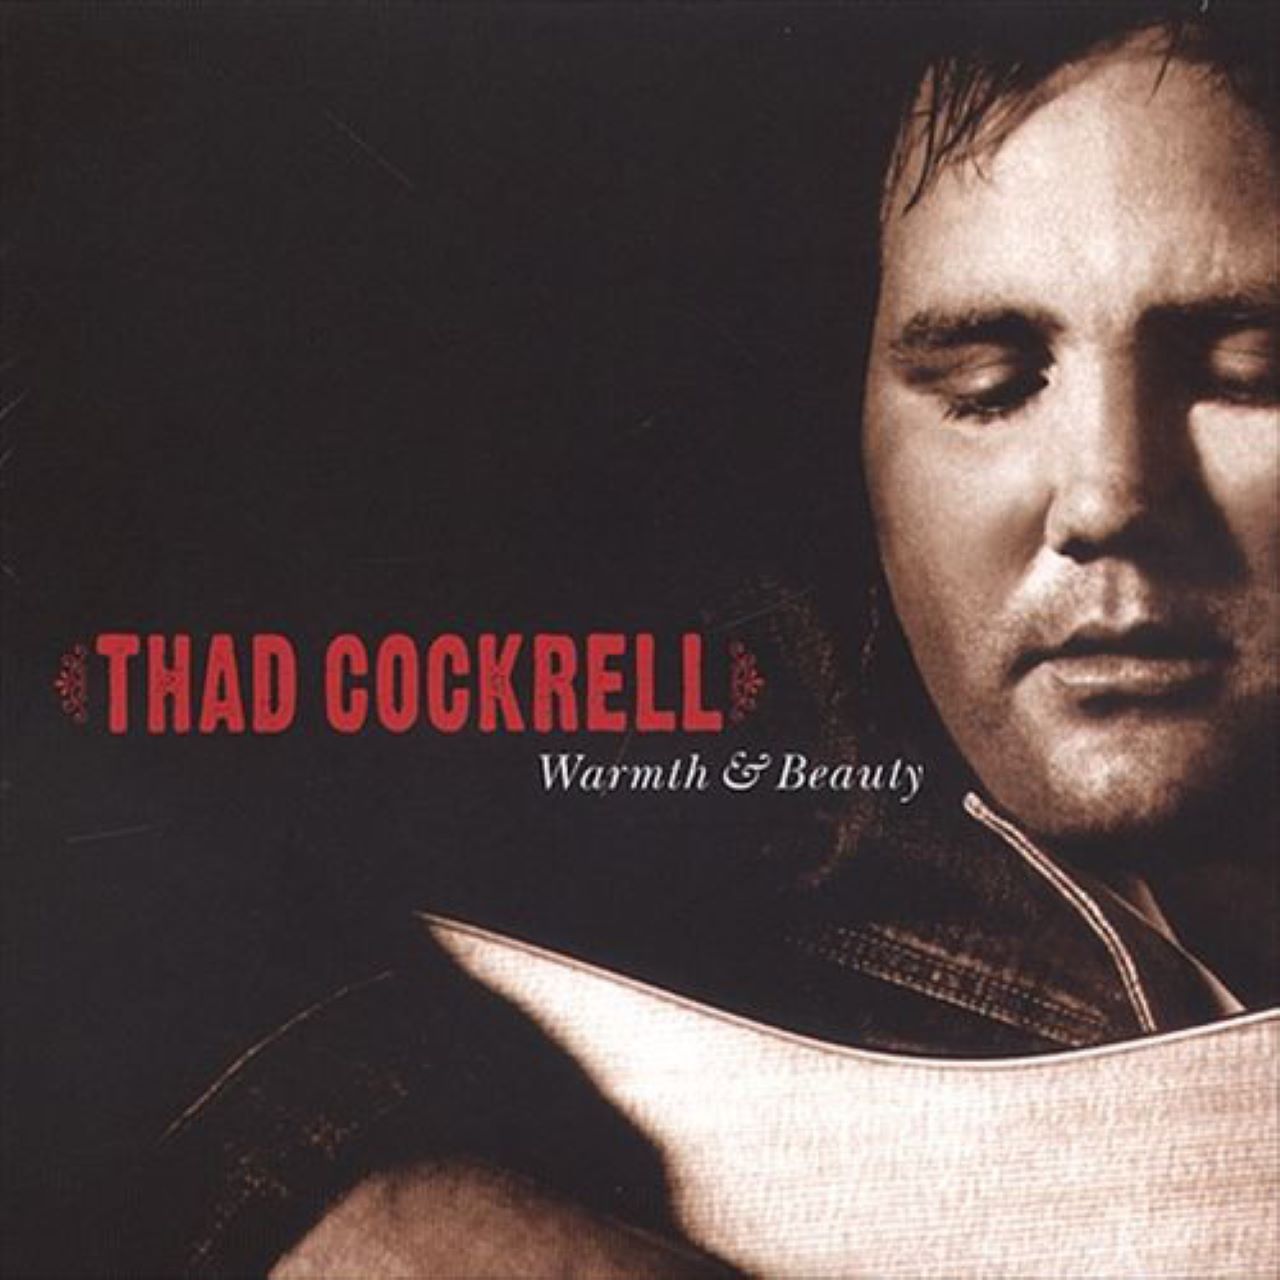 Thad Cockrell - Warm & Beauty cover album